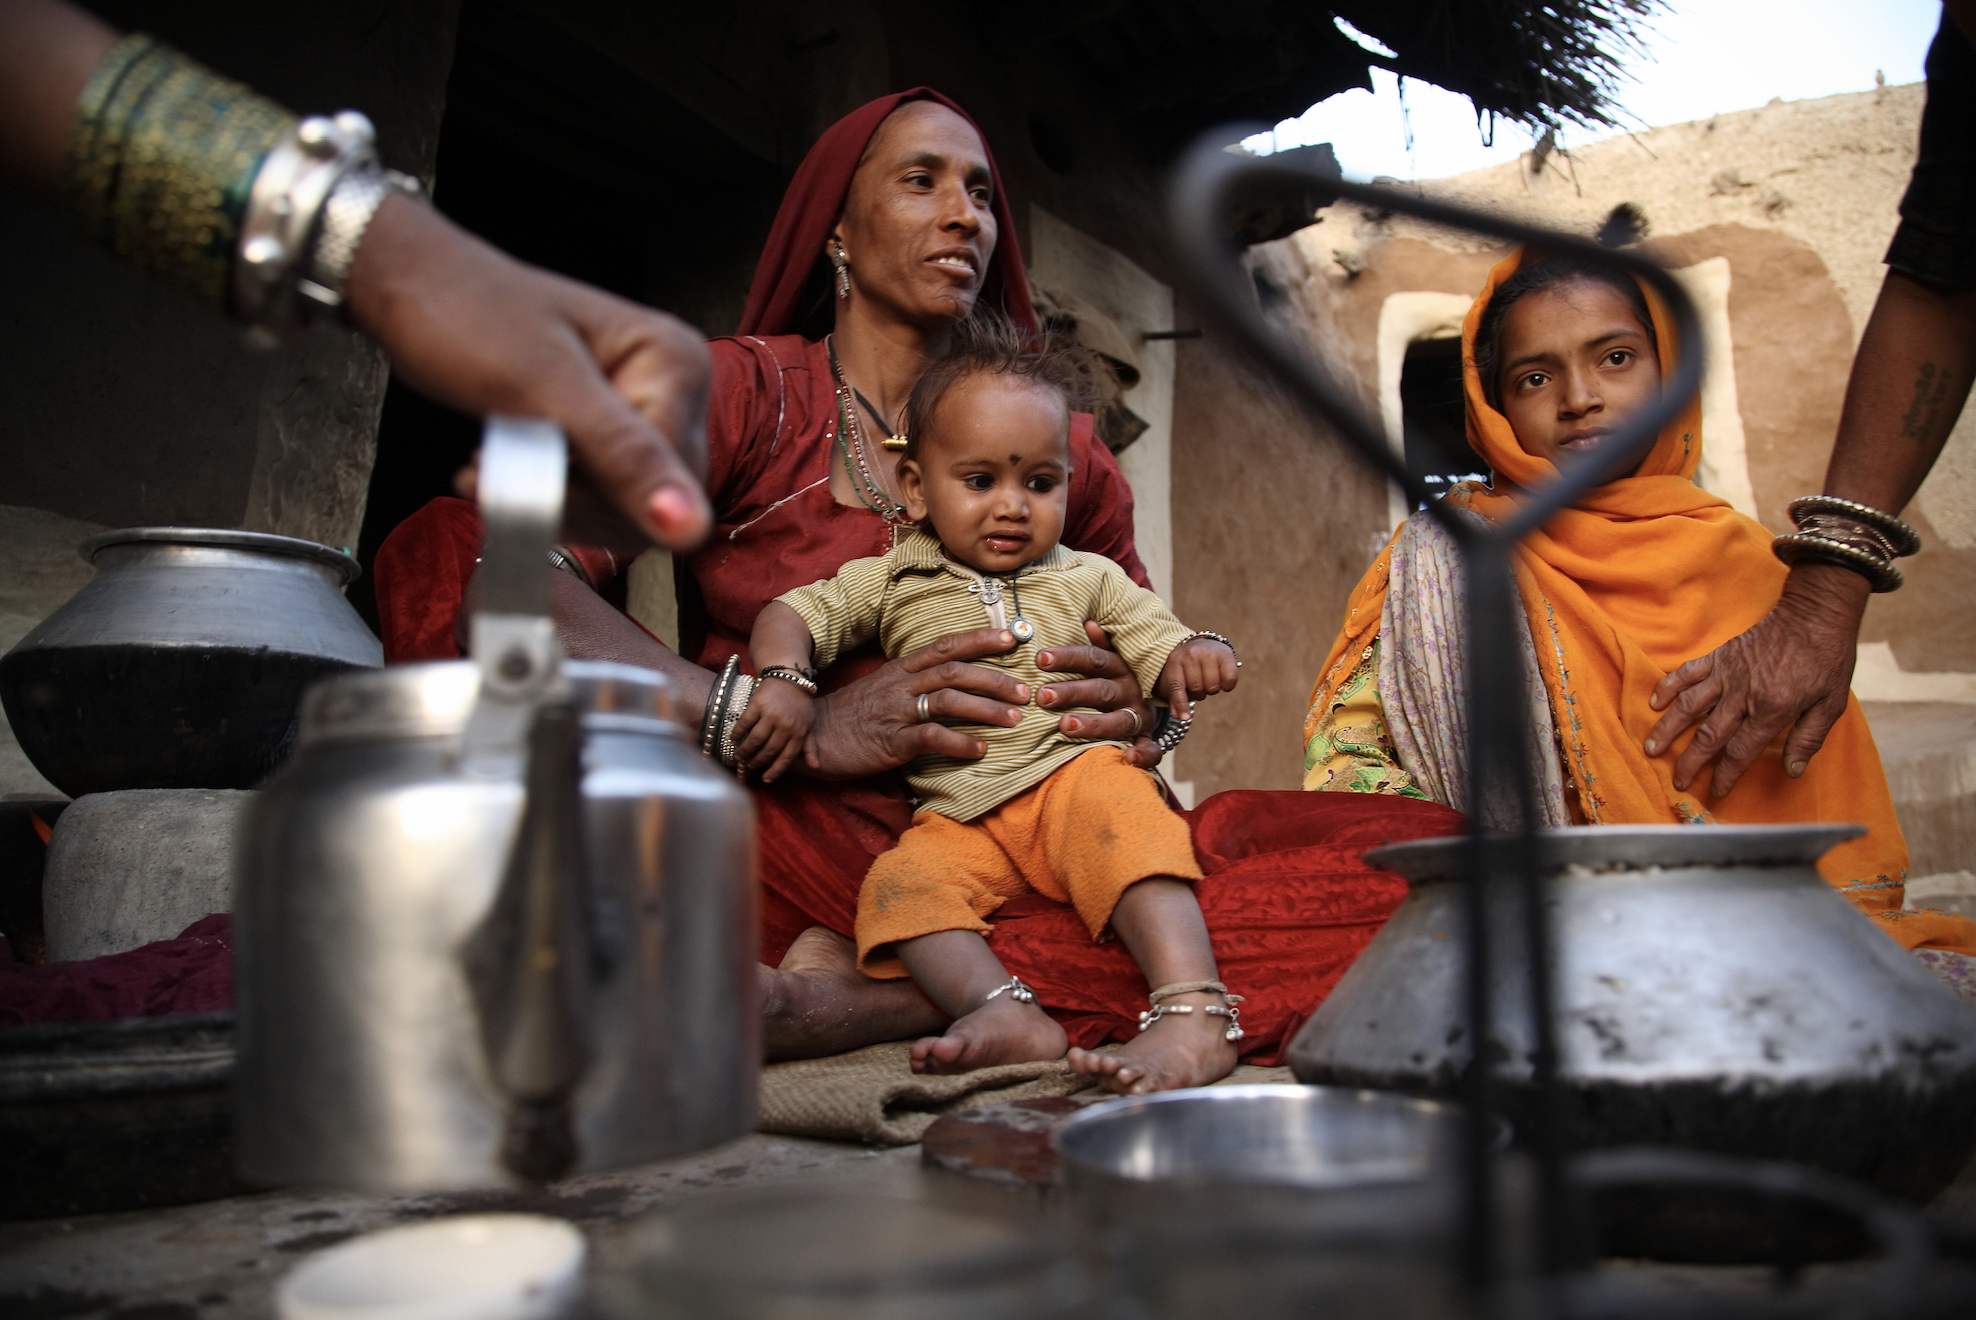 Tulsi Devi, the wife of a farmer, prepares tea at her home in Nagar Village, Rajasthan, India